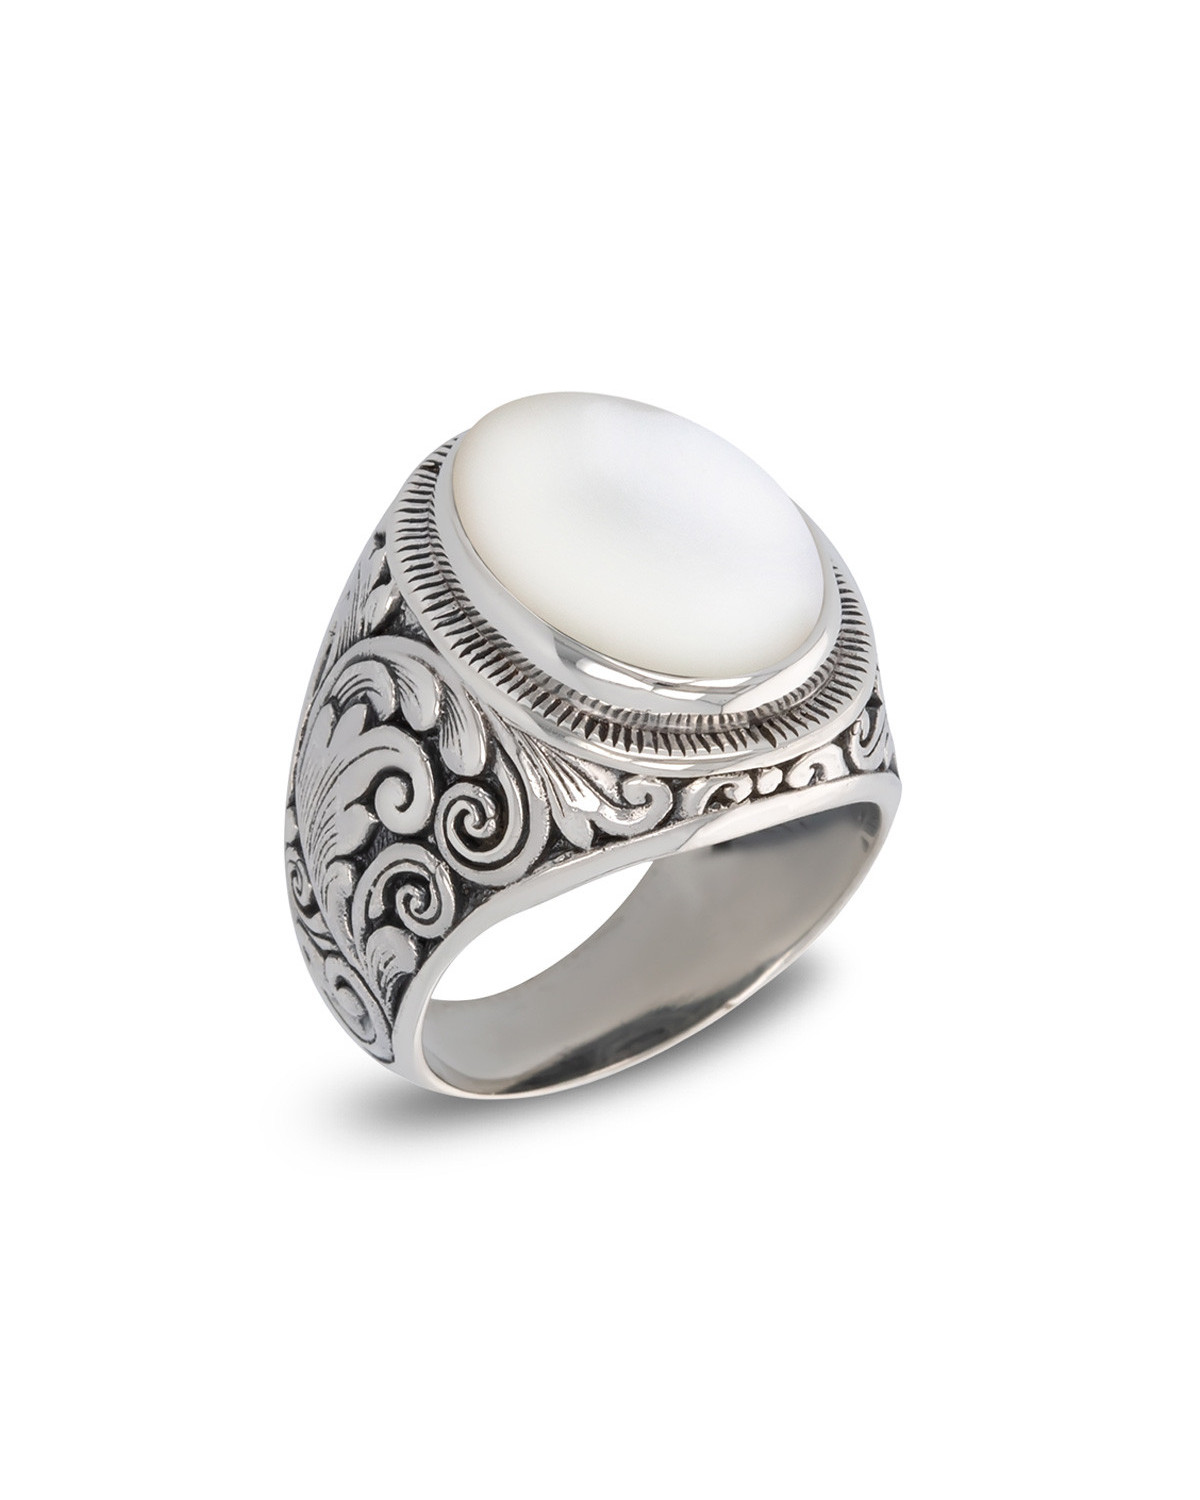 Antique effect 925 Sterling Silver White Mother-of-pearl Biker Ring ADEN - 1